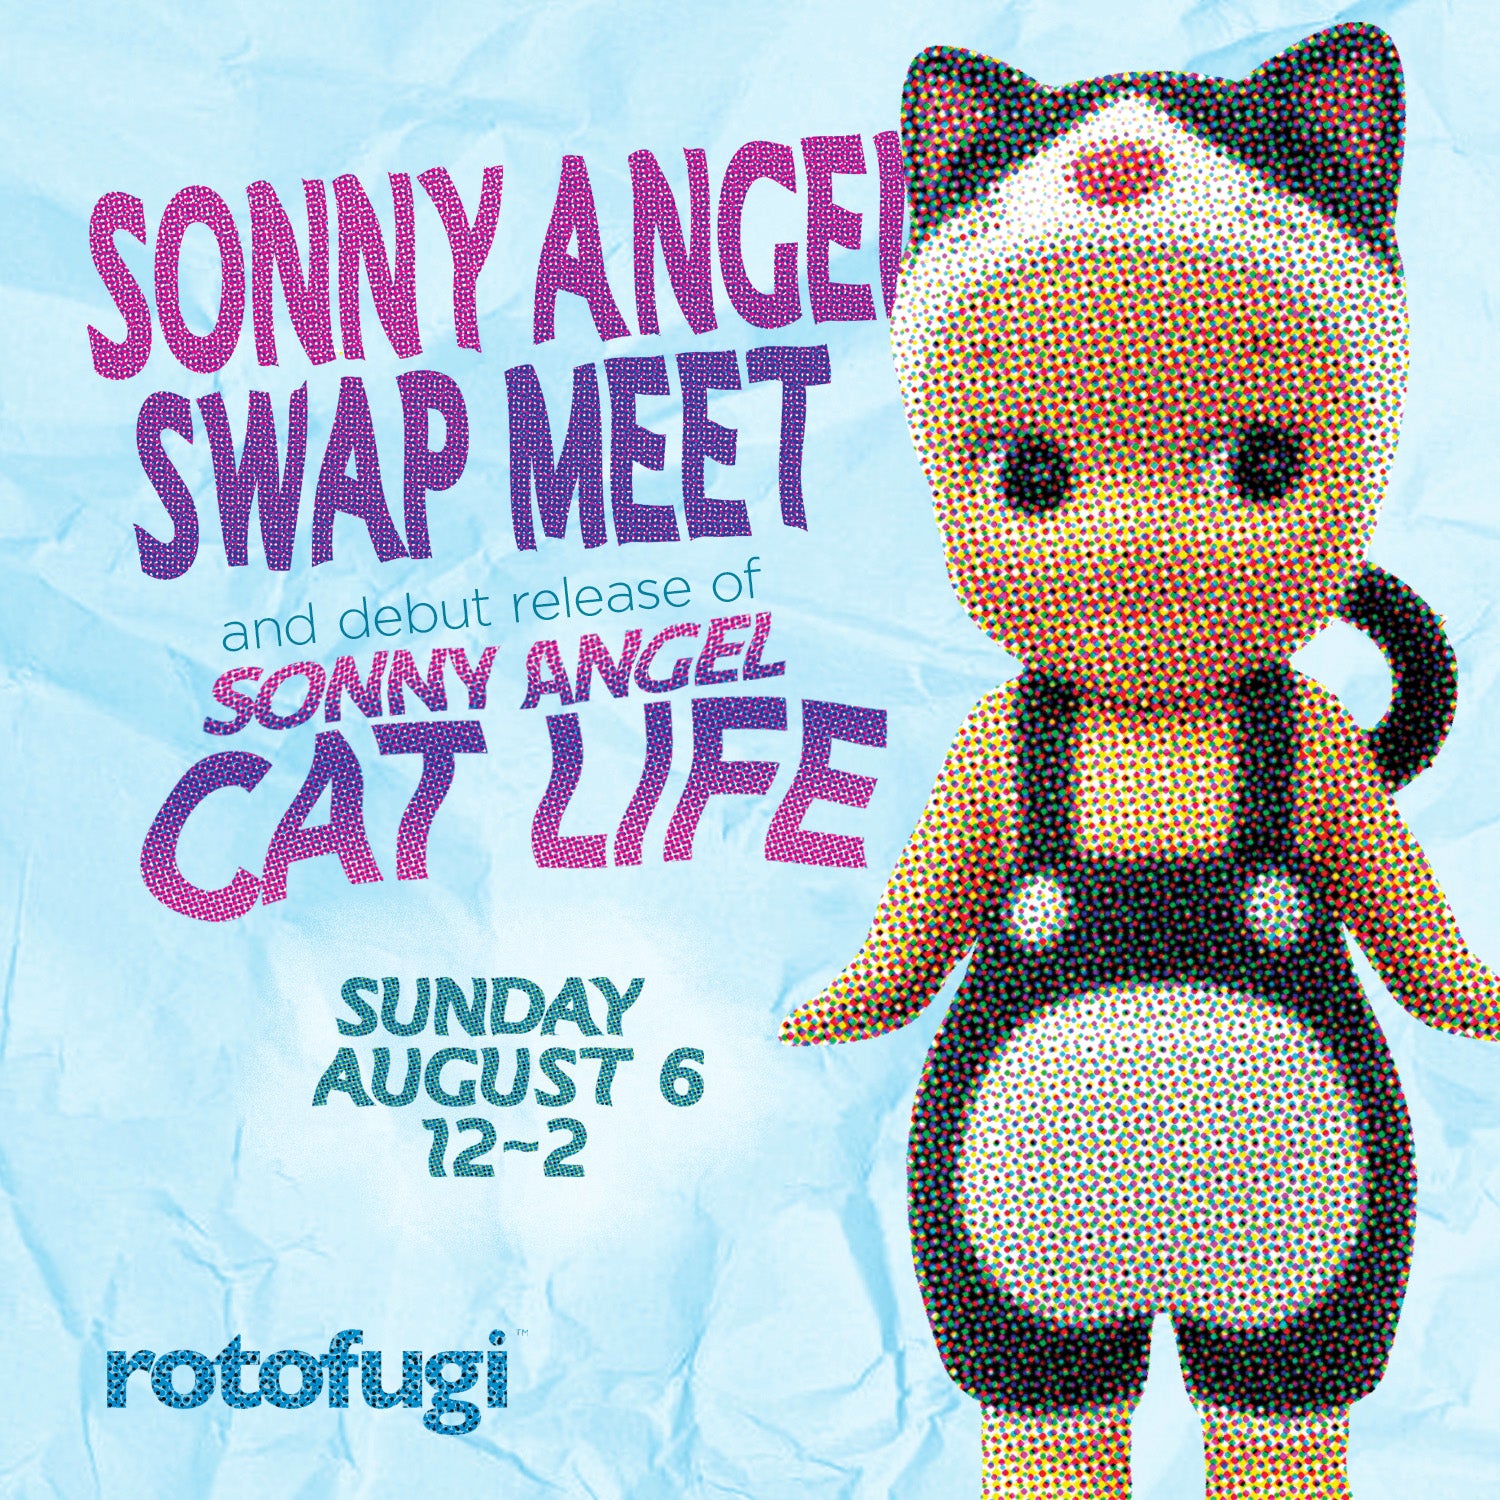 Promo Image for Sonny Angel Swap Meet and Cat Life Release